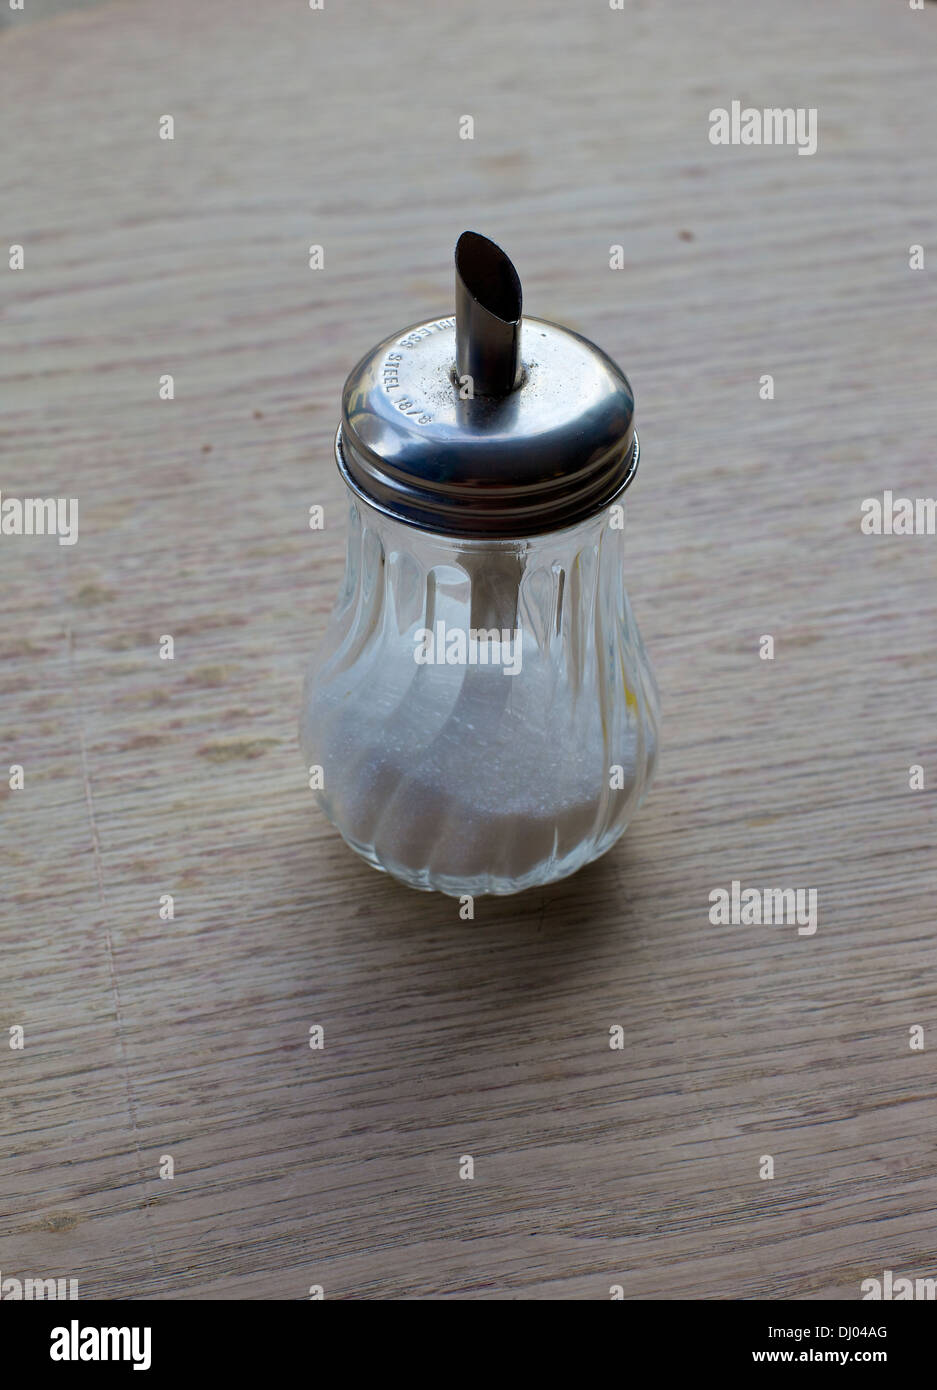 Diner style sugar pourer dispenser on wooden table at posh cafe Stock Photo